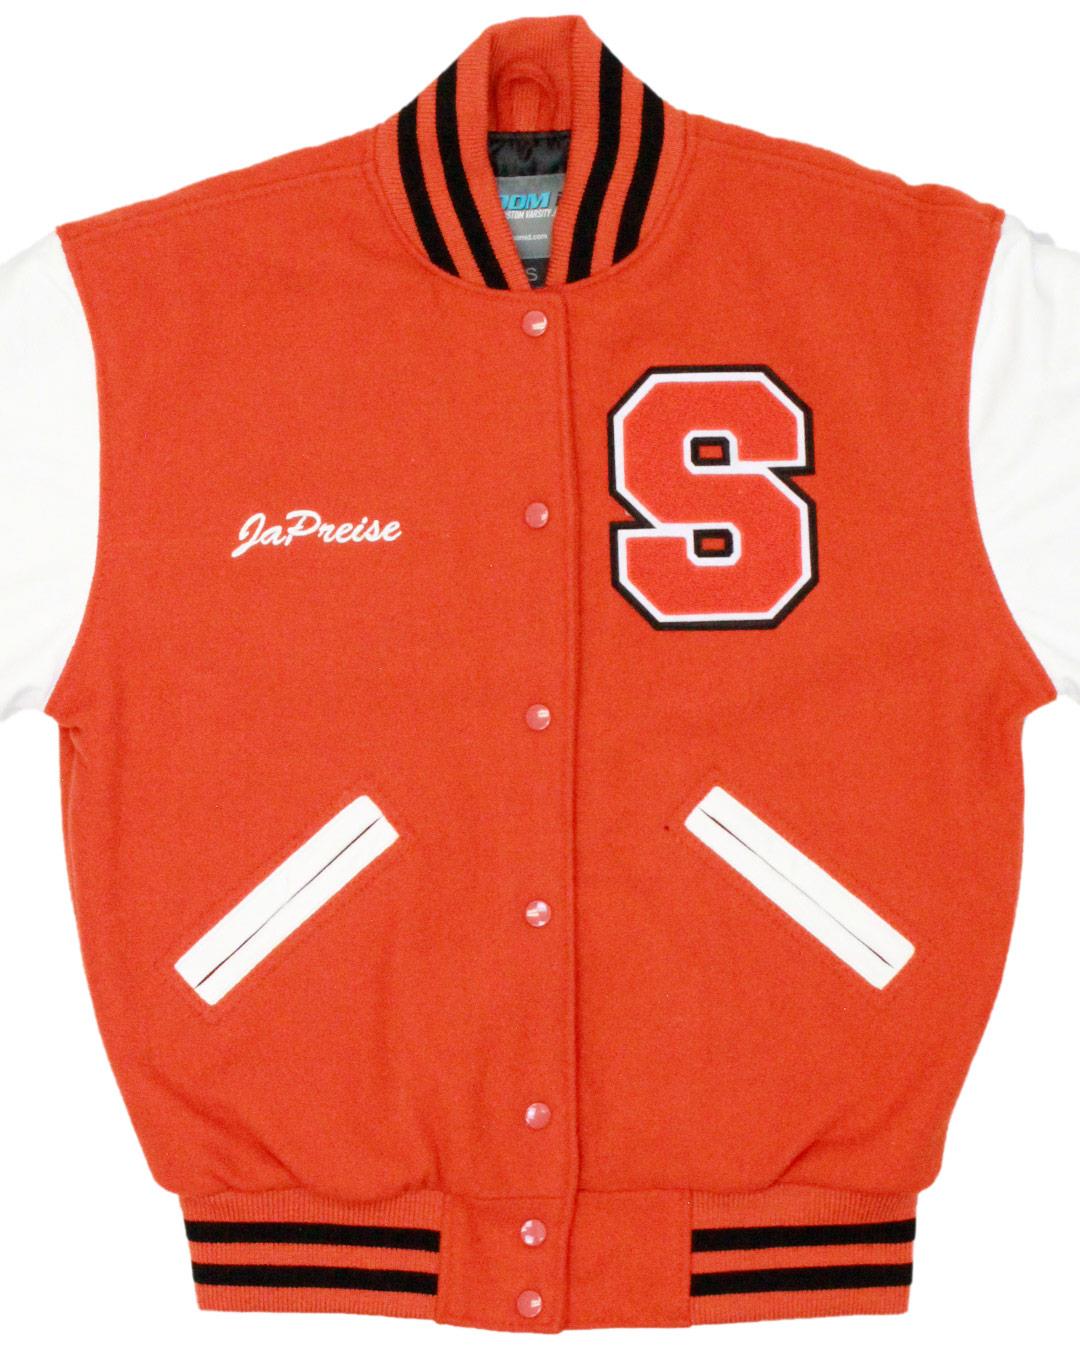 Stivers School for the Arts Tigers Letterman Jacket, Dayton, OH - Front 